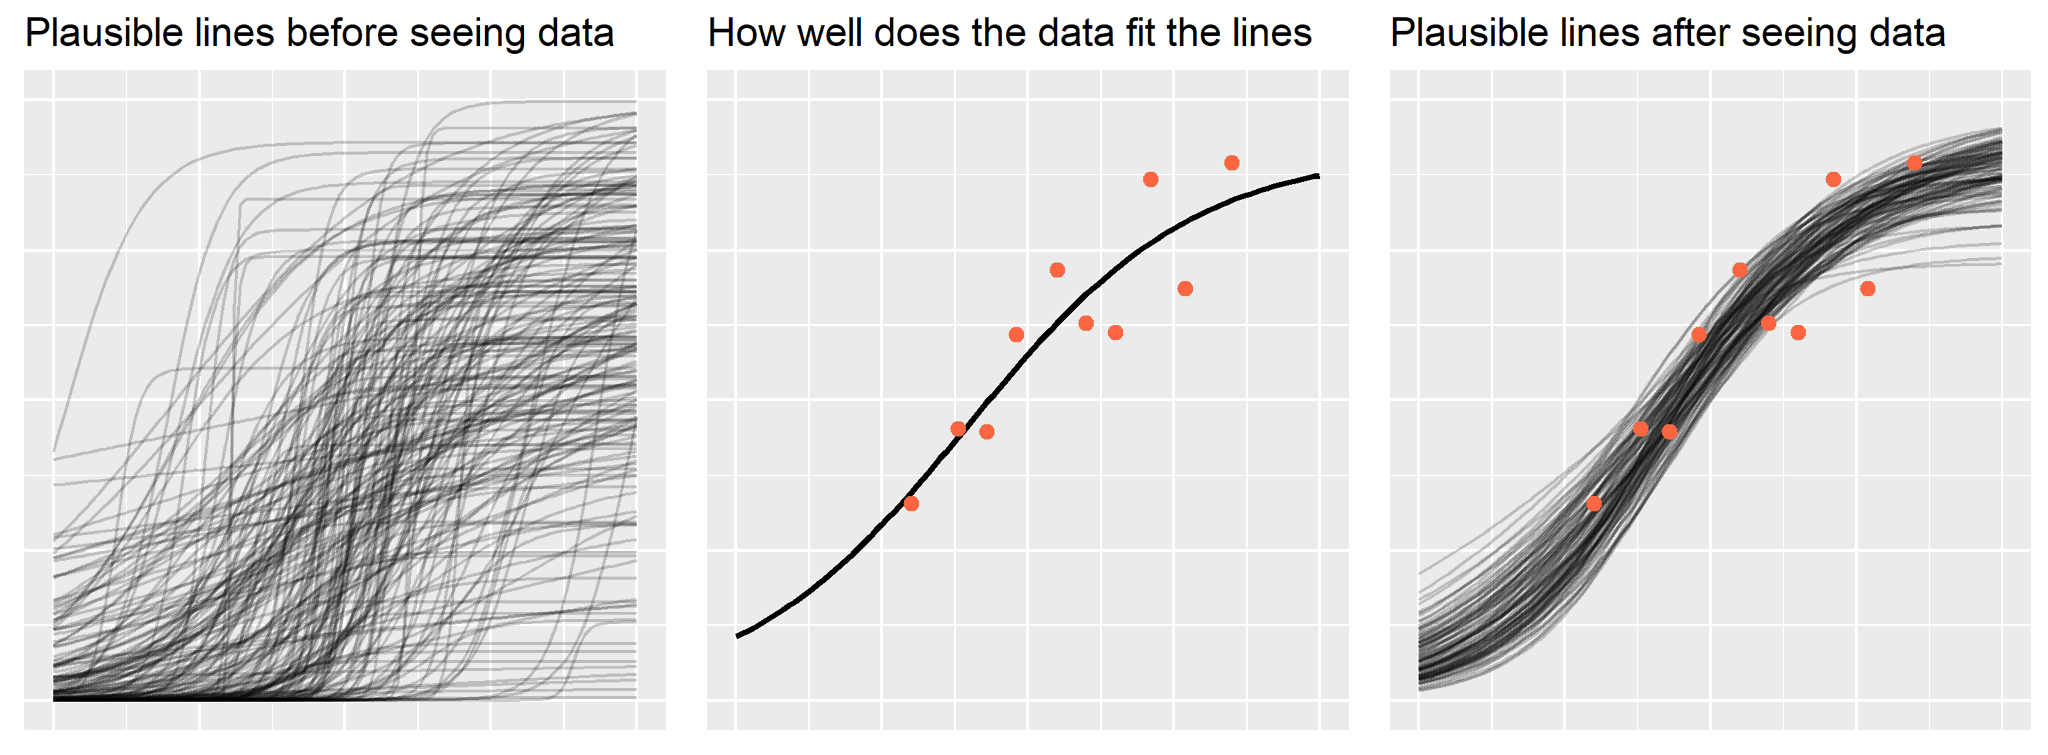 Three panel illustrating Bayes' theorem. The left panel shows samples from the prior distribution, the center panel shows the data and curve of best fit, and the right panel shows samples from the posterior distribution. The first panel has a wide spread of lines, the center a single line cutting through the data, the last a narrow spread of lines around the data.